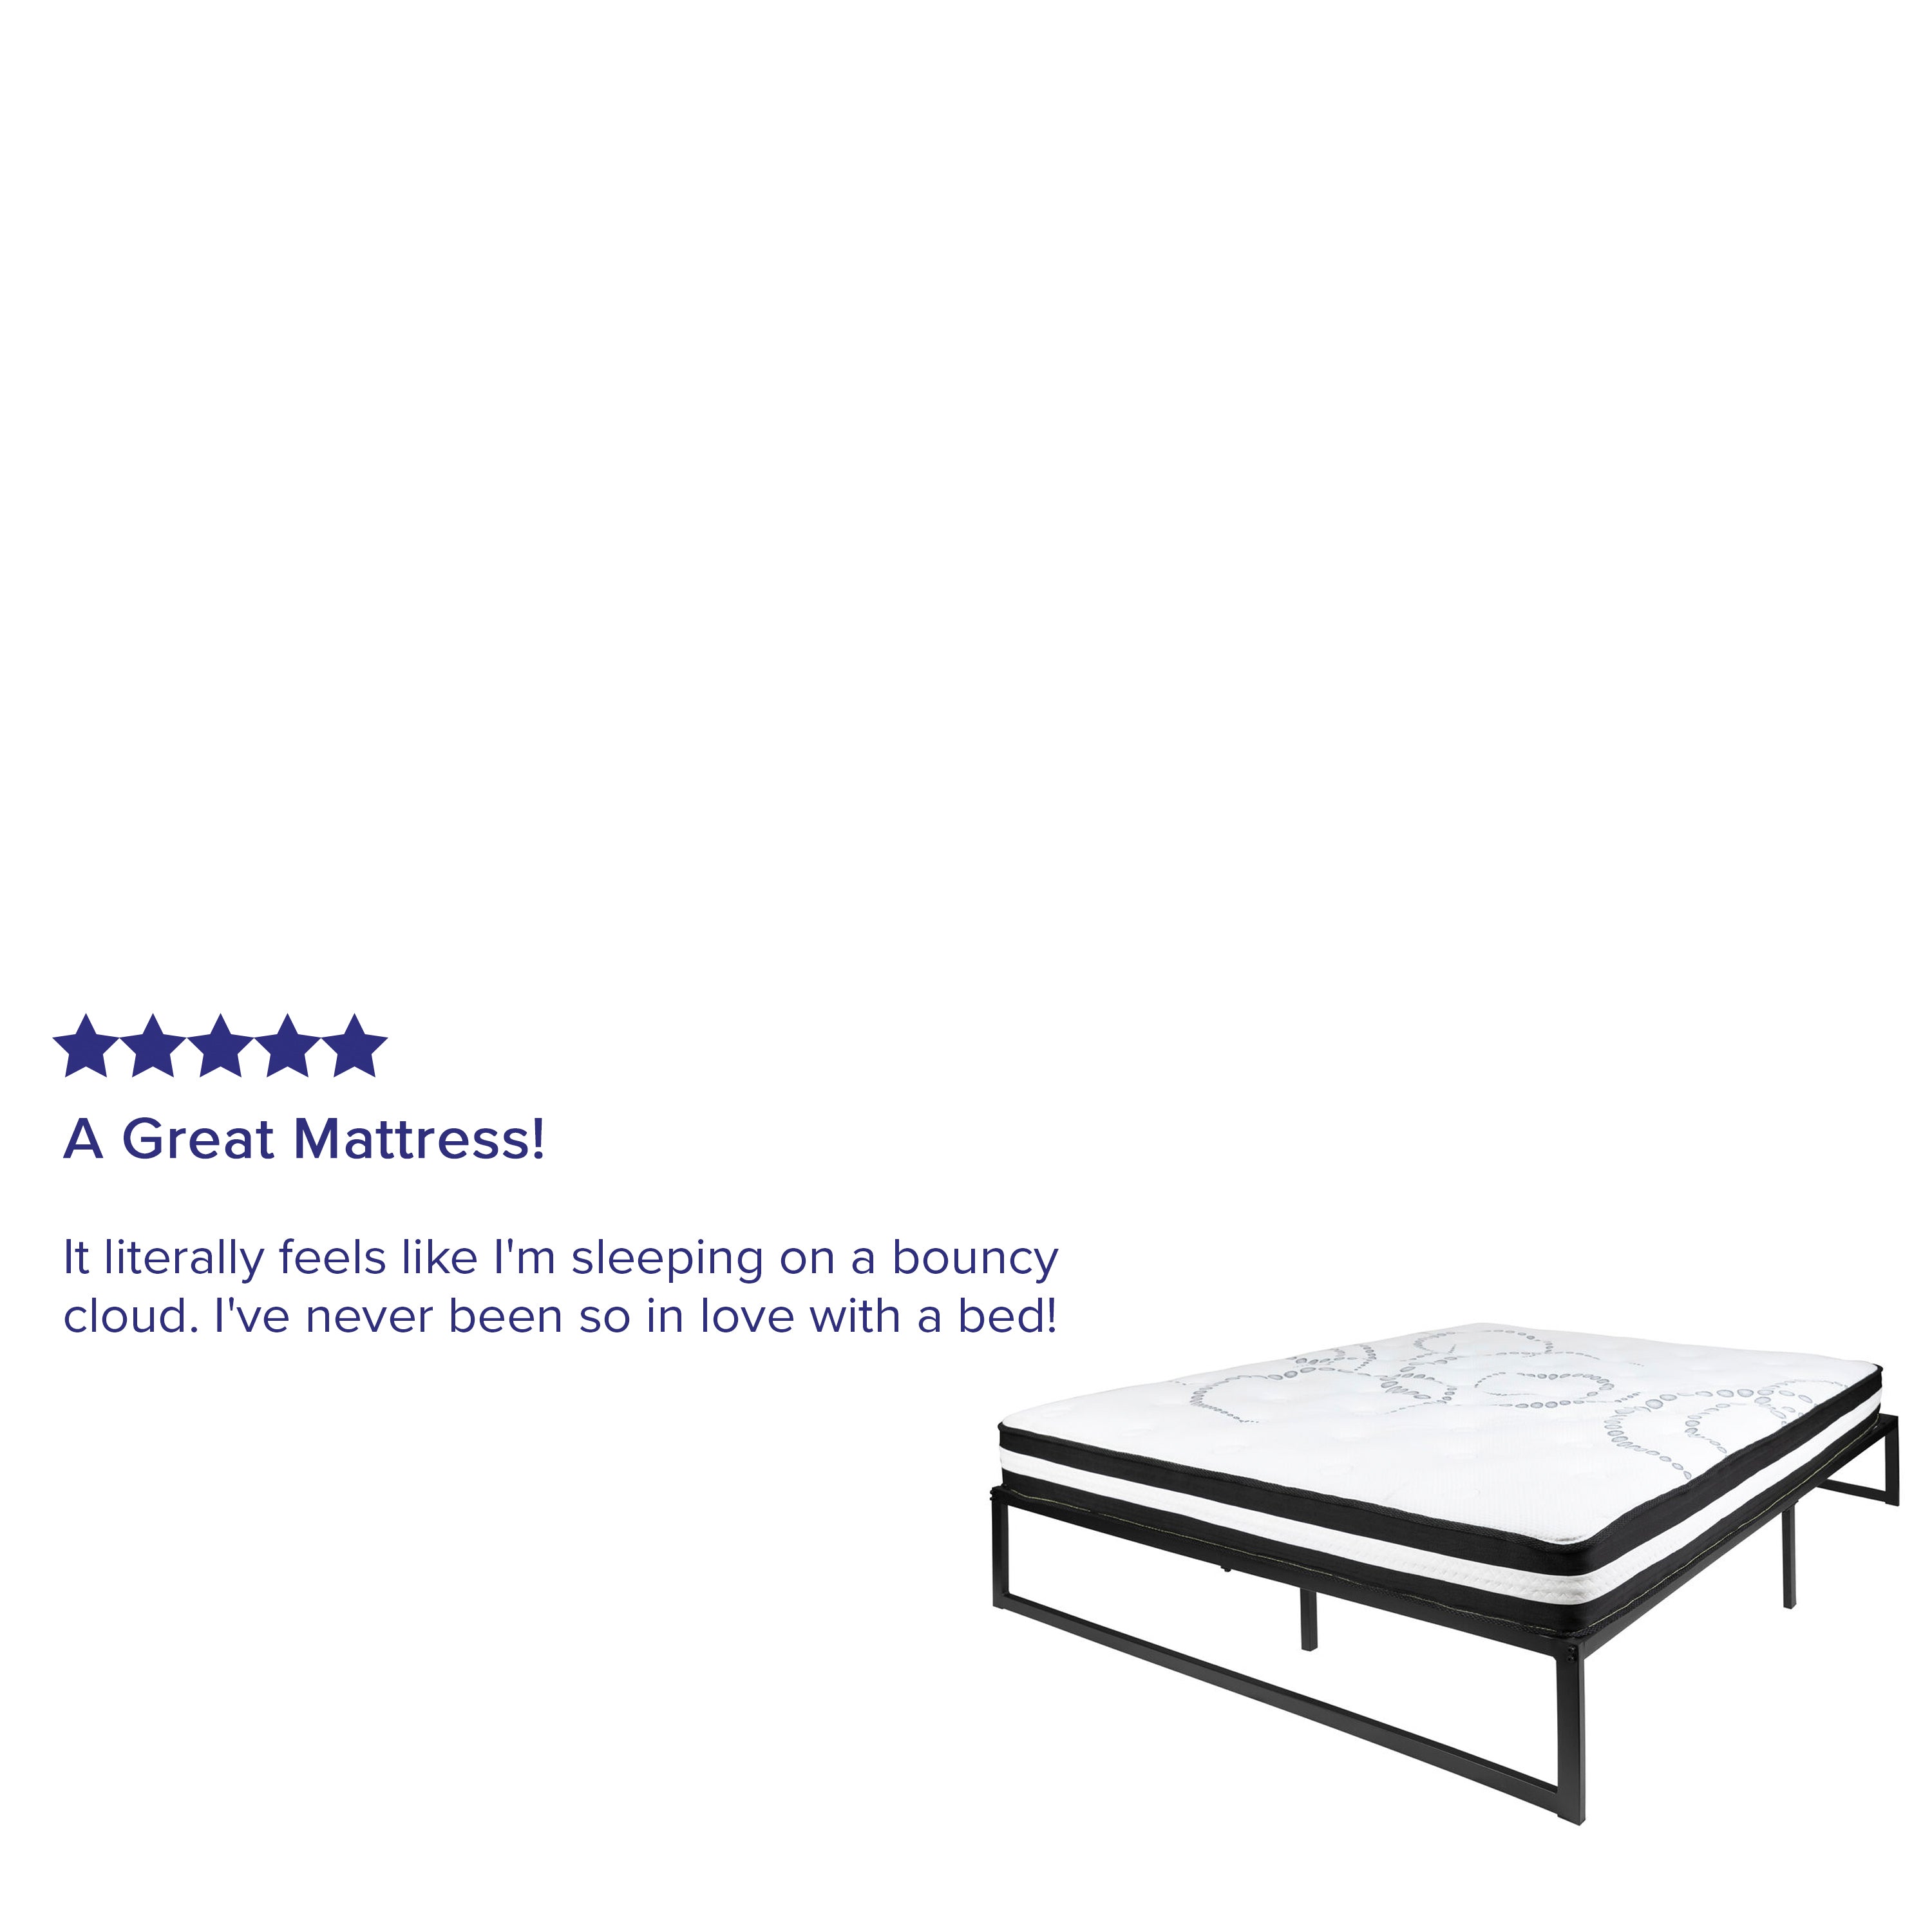 14 Inch Metal Platform Bed Frame with 10 Inch Pocket Spring Mattress in a Box (No Box Spring Required)-Bed & Mattress-Flash Furniture-Wall2Wall Furnishings